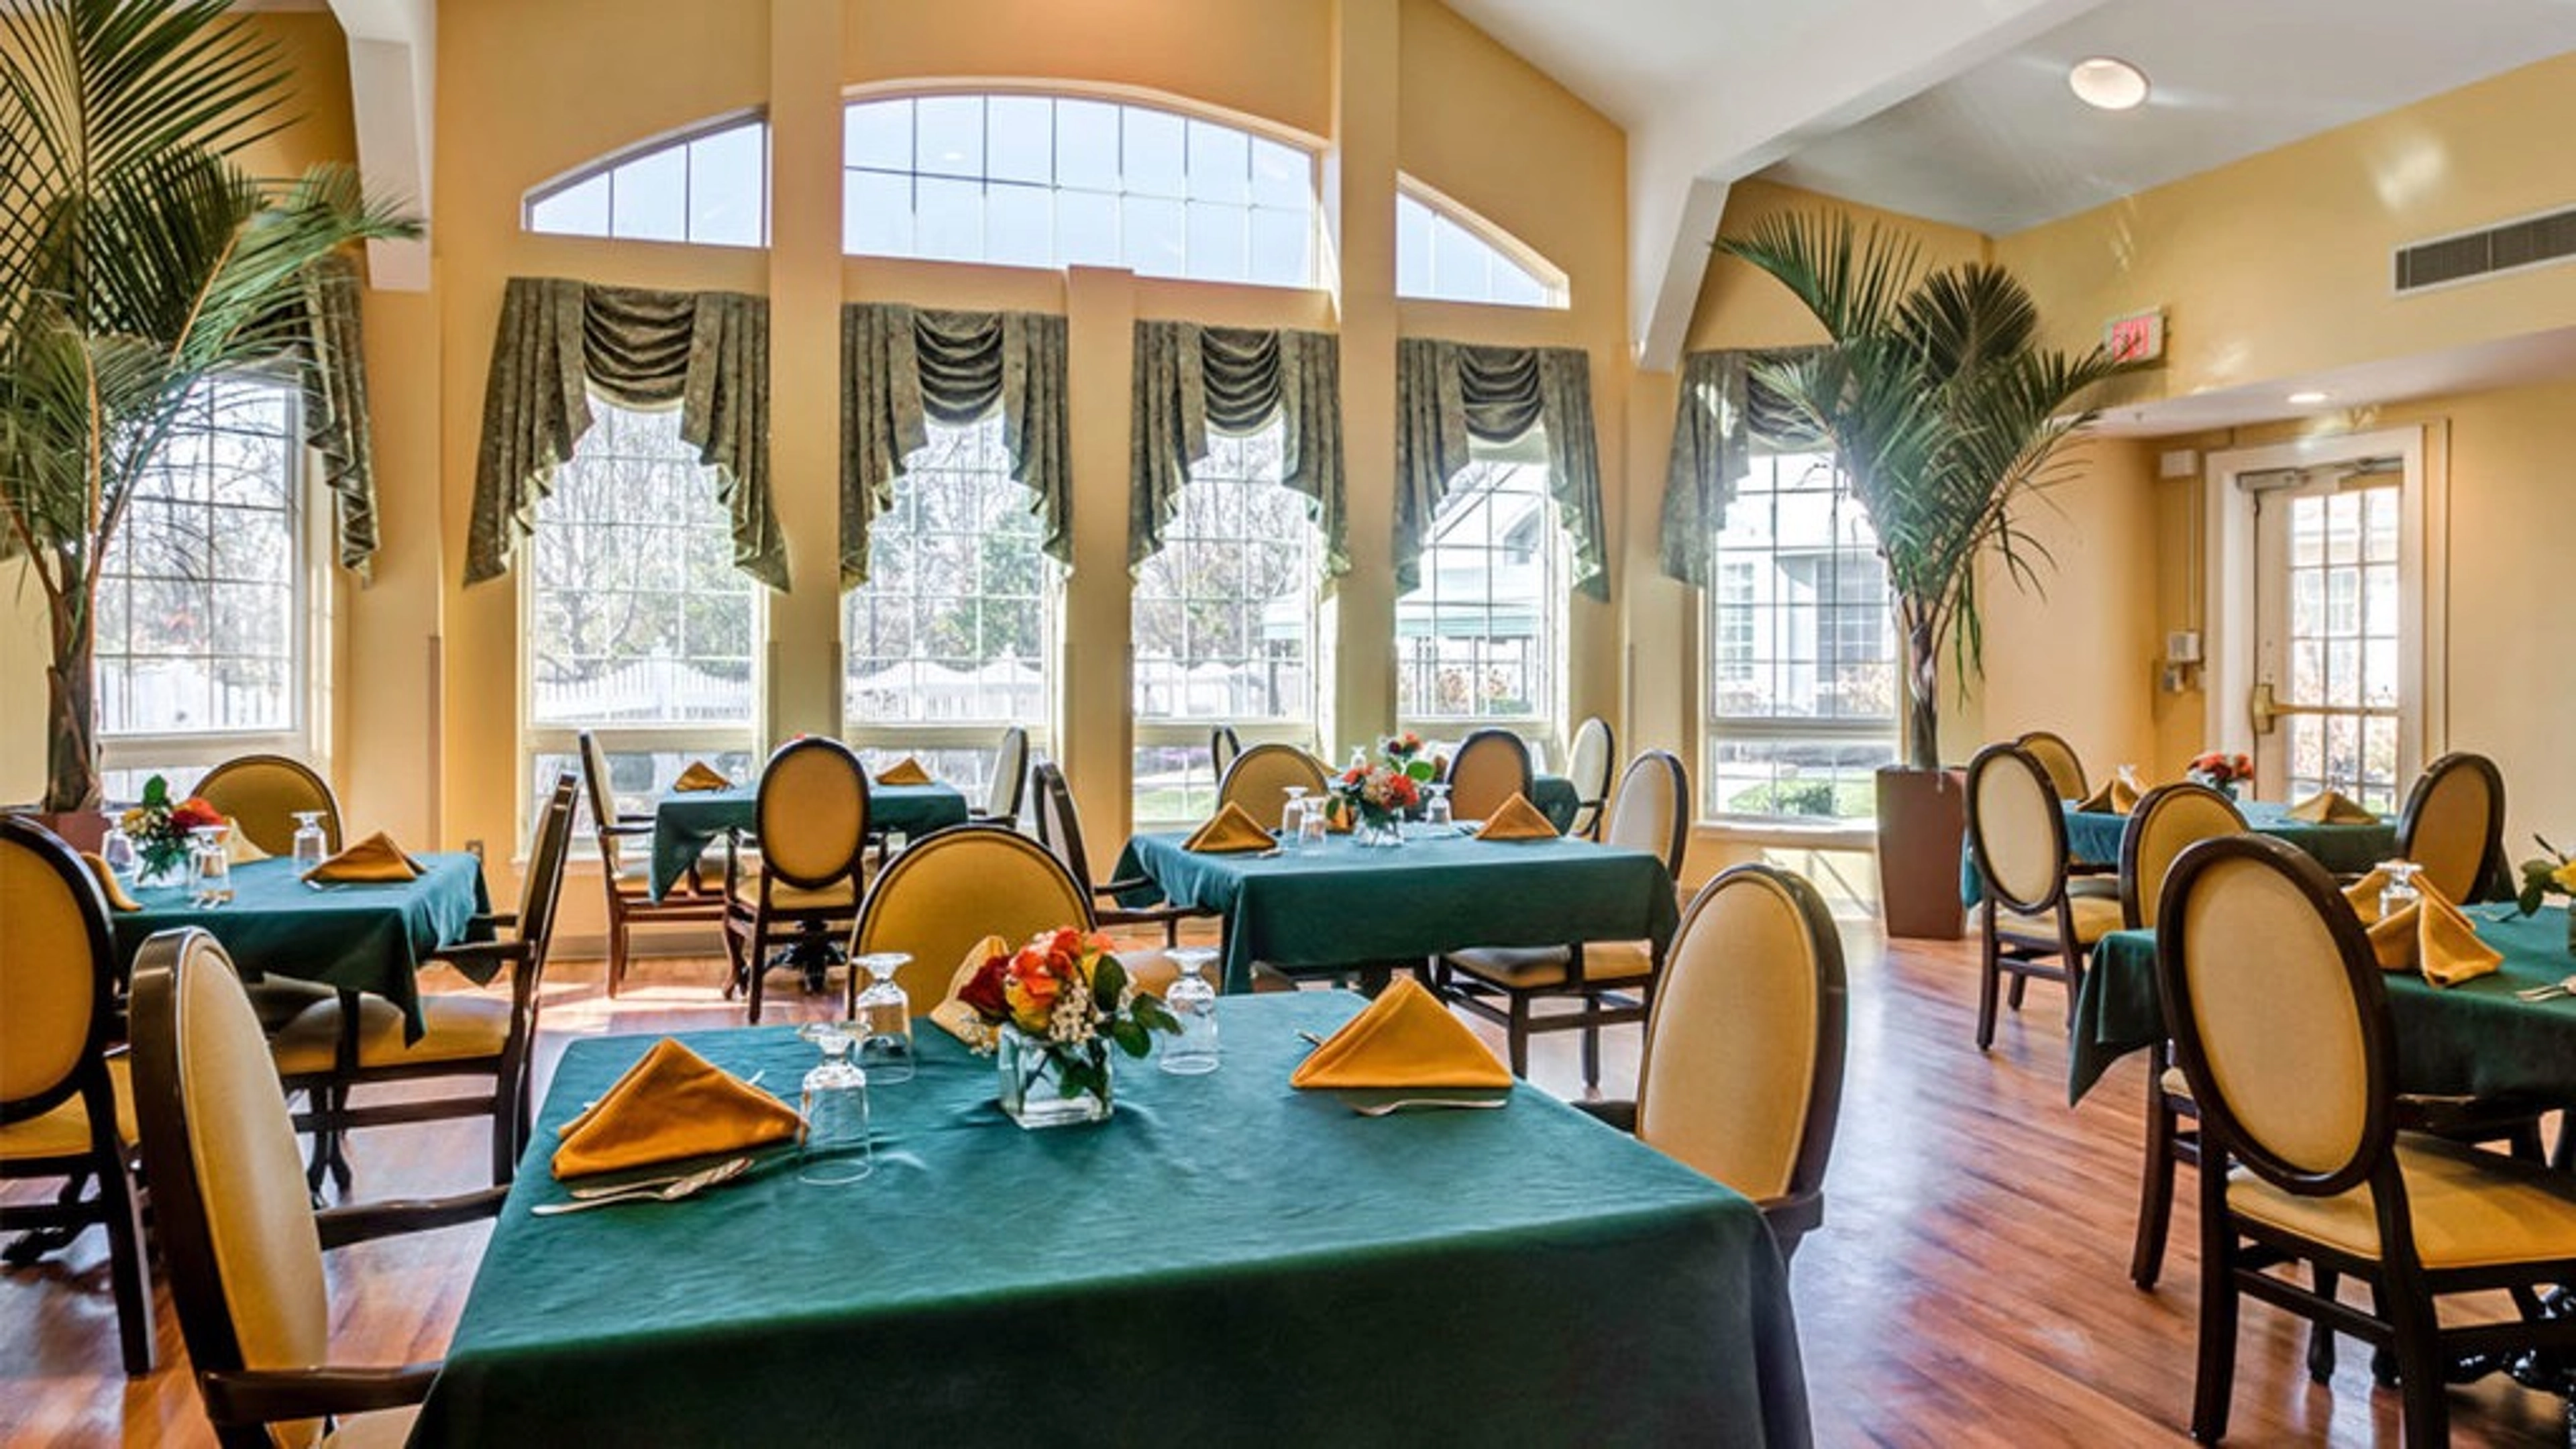 Reflections at Colts Neck Dining Room